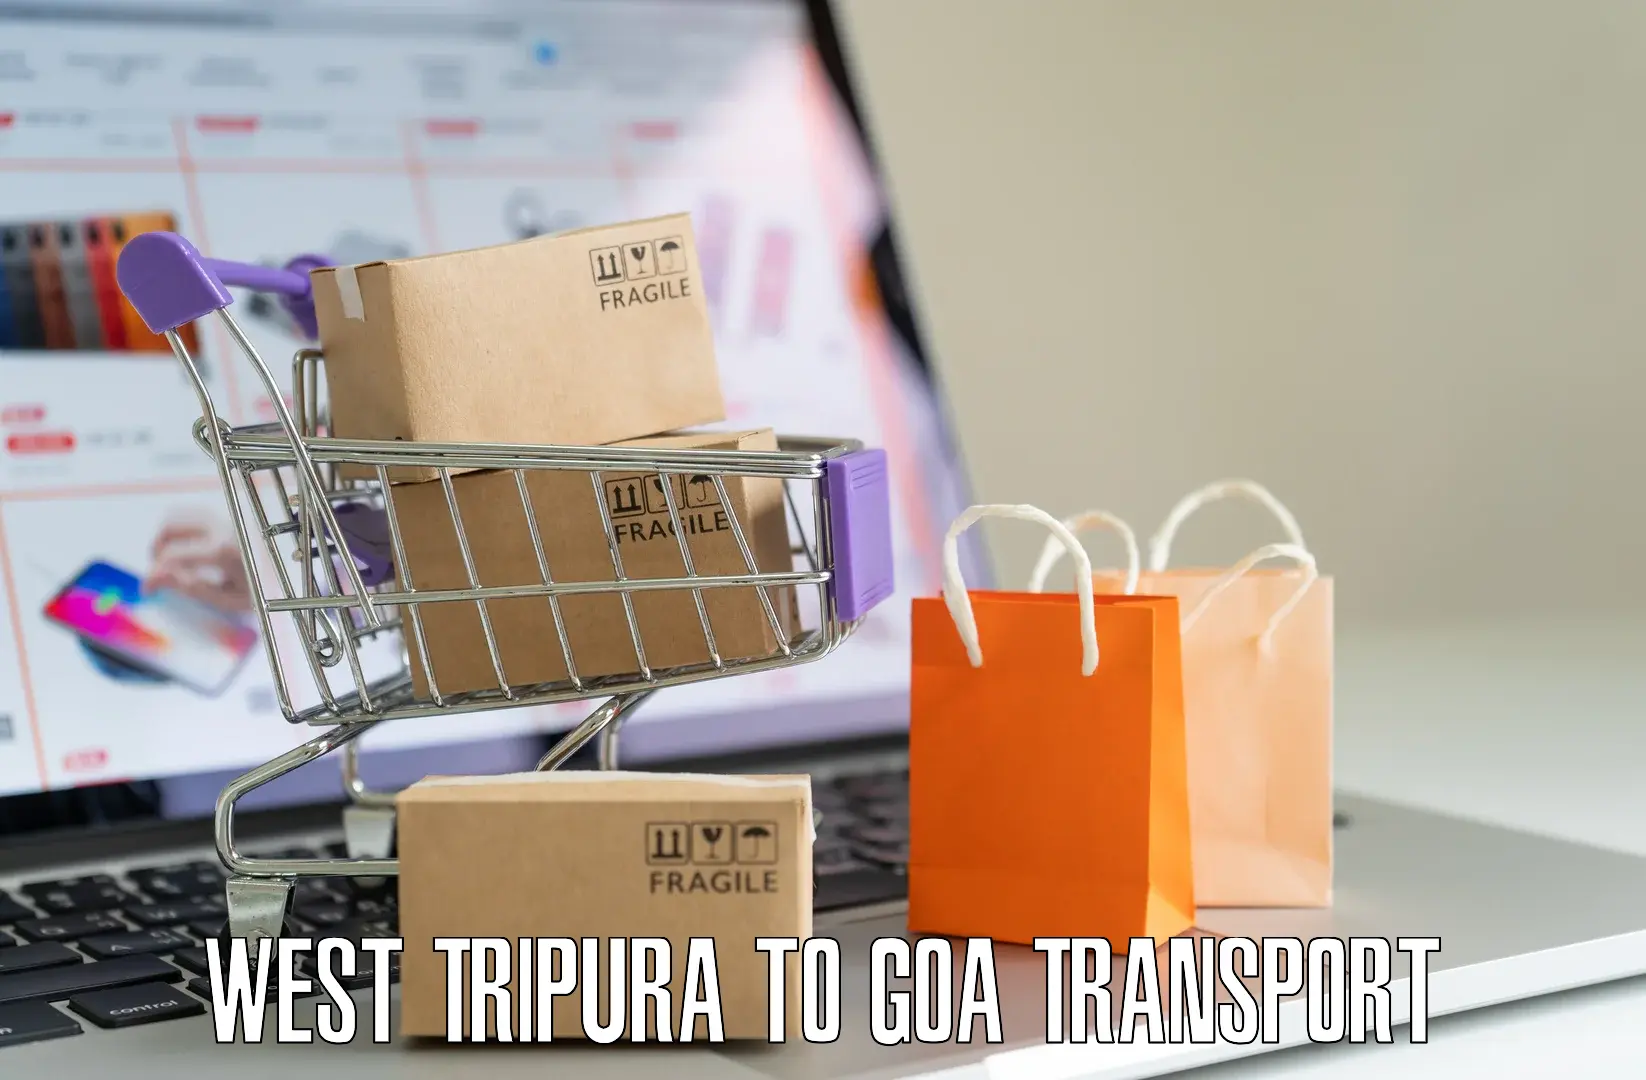 Daily transport service West Tripura to IIT Goa